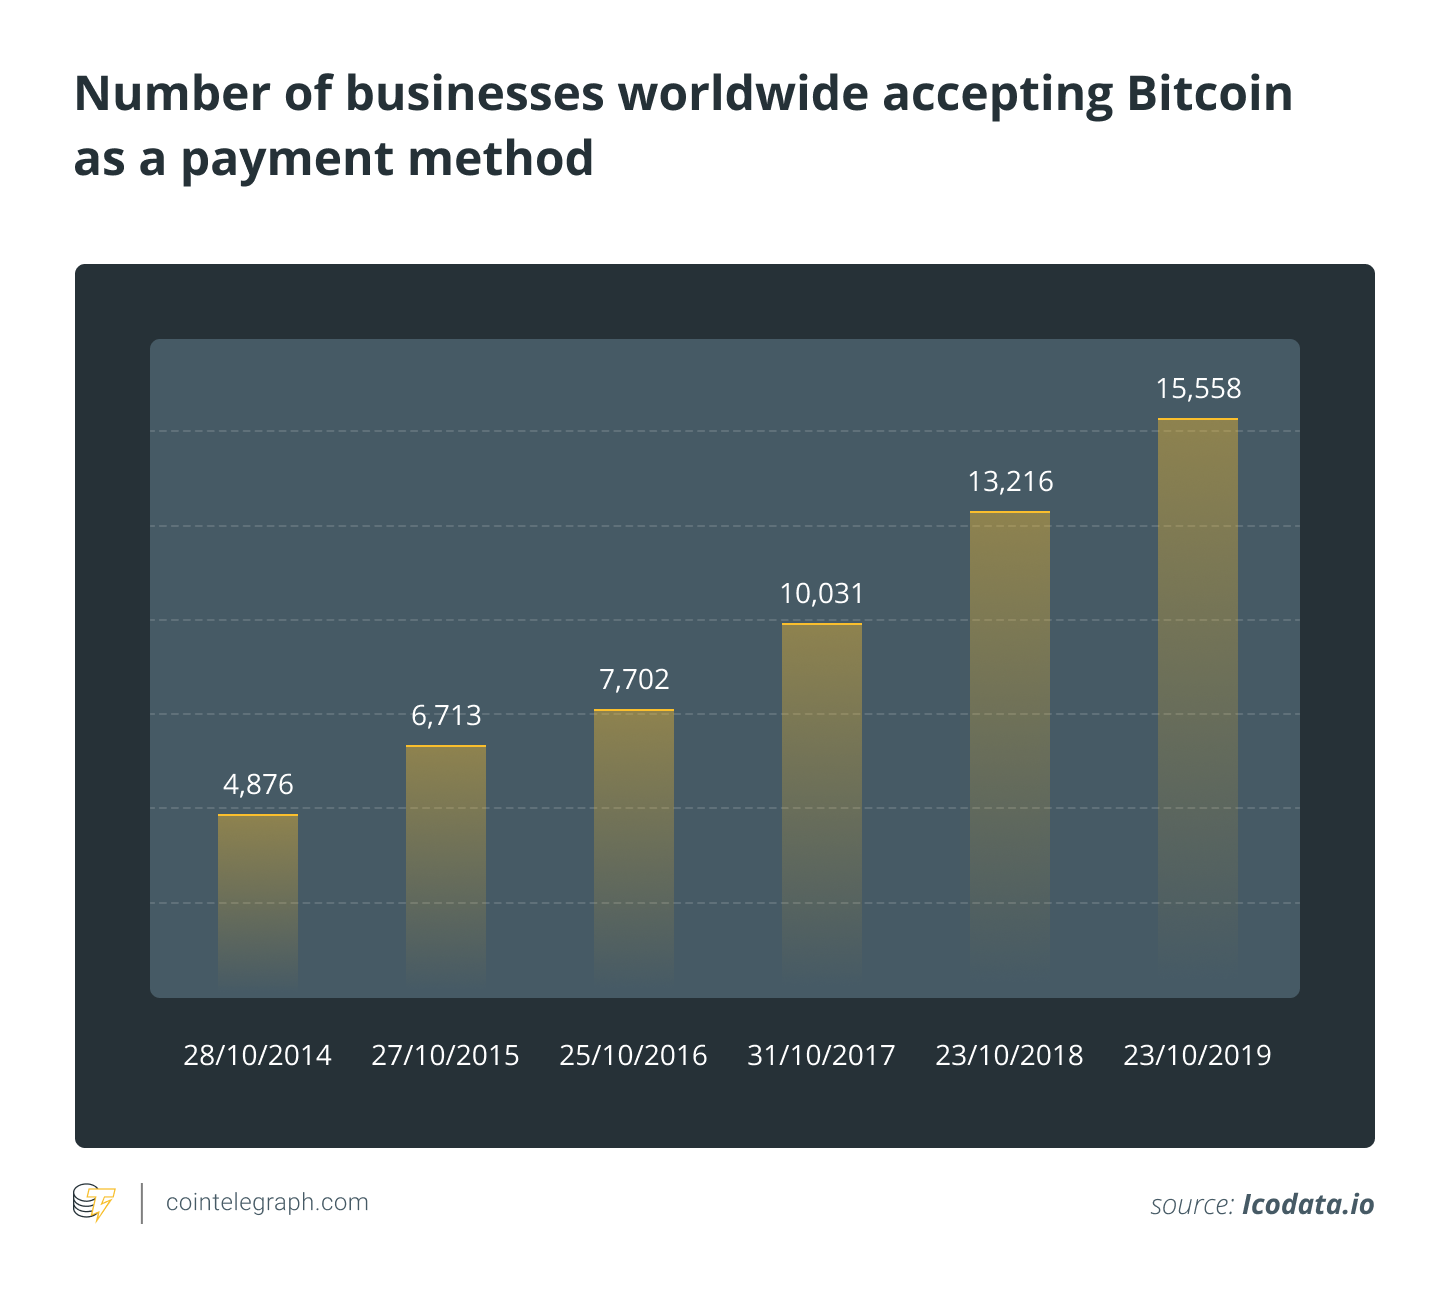 Number of businesses worldwide accepting Bitcoin as a payment method